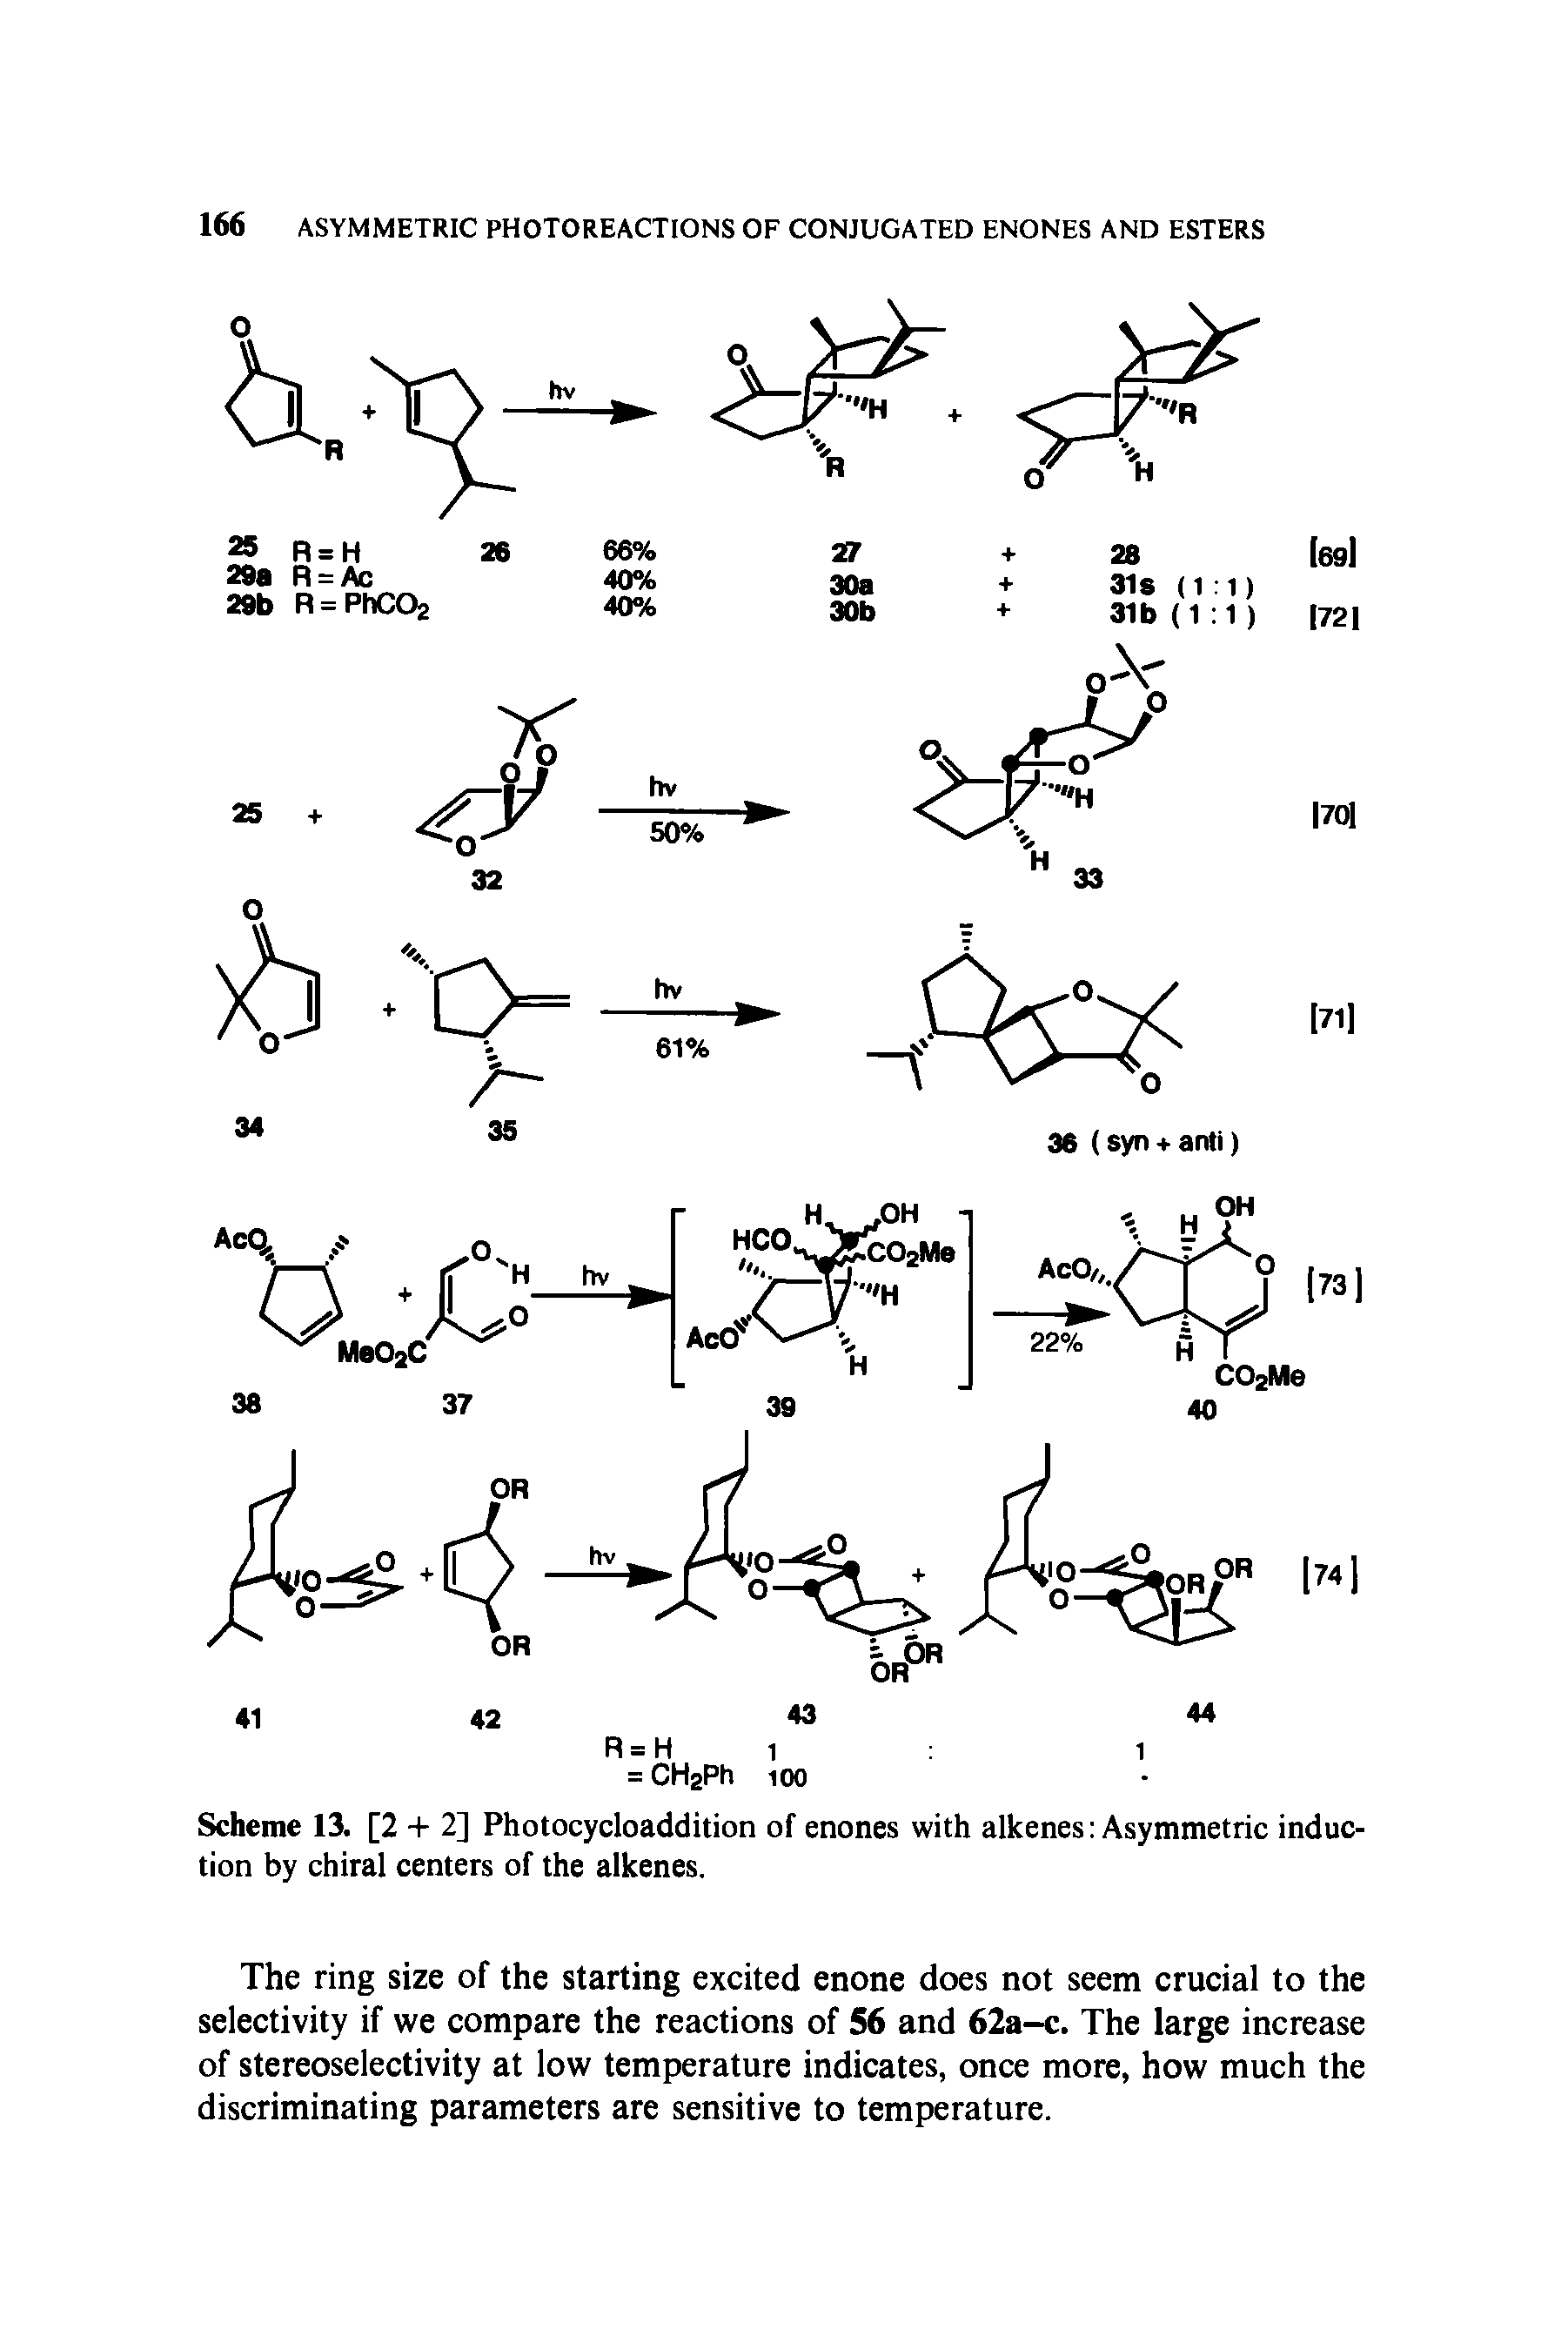 Scheme 13. [2 + 2] Photocycloaddition of enones with alkenes Asymmetric induction by chiral centers of the alkenes.